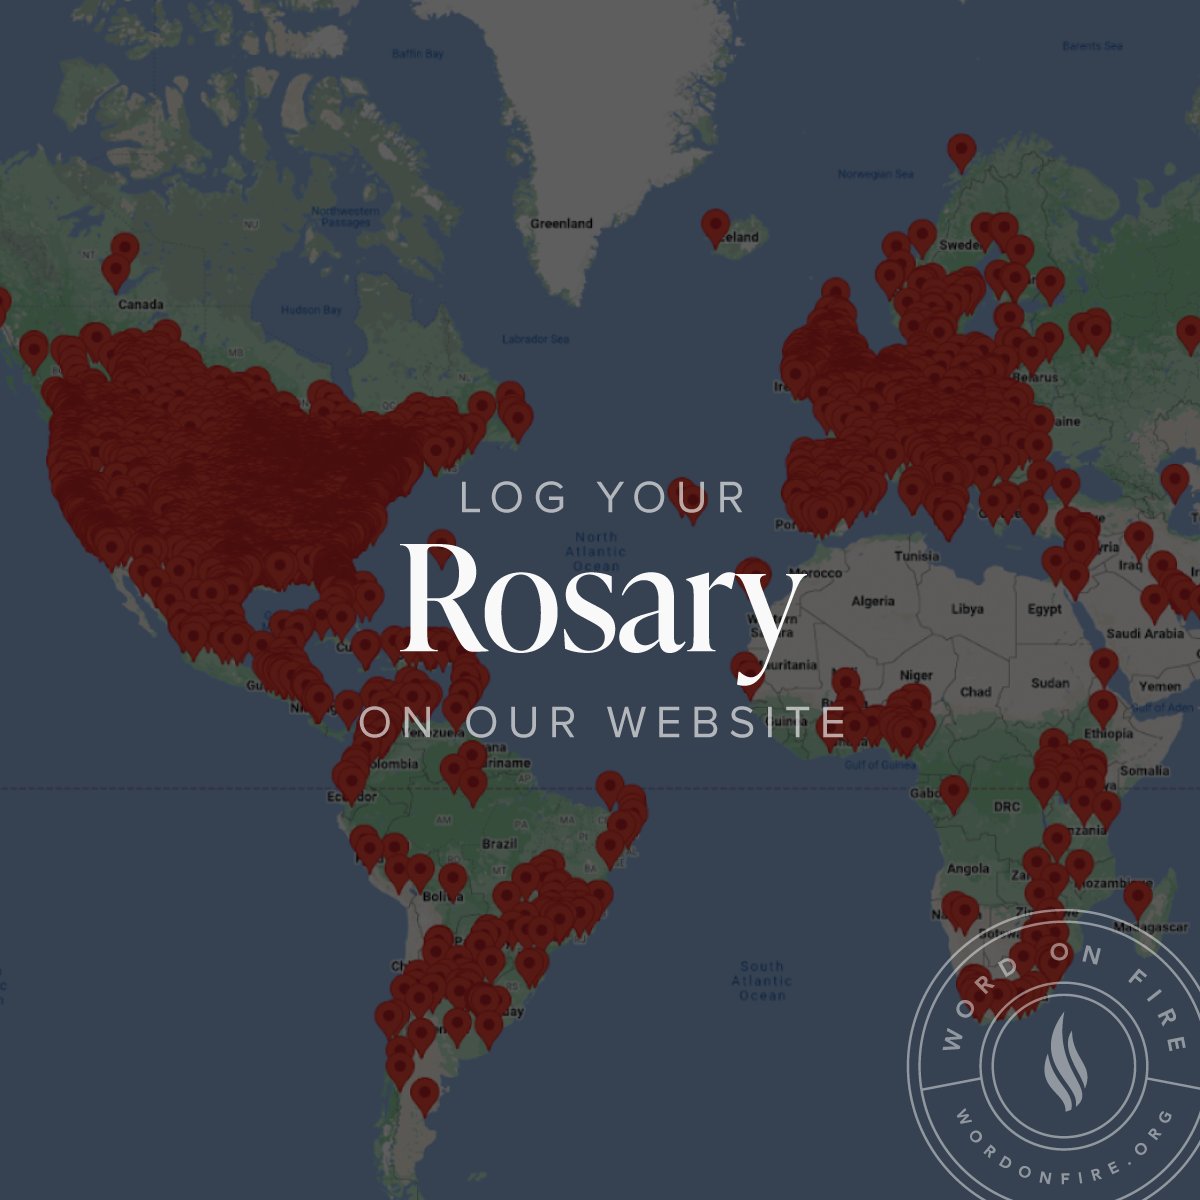 Today the Church celebrates Our Lady of Fatima. The Virgin Mary asked that we pray the Rosary daily. Join us in our 50,000 Rosaries challenge during May and pray a Rosary today. Log your Rosary on our website: 
wordonfire.org/pray-rosary/#l…